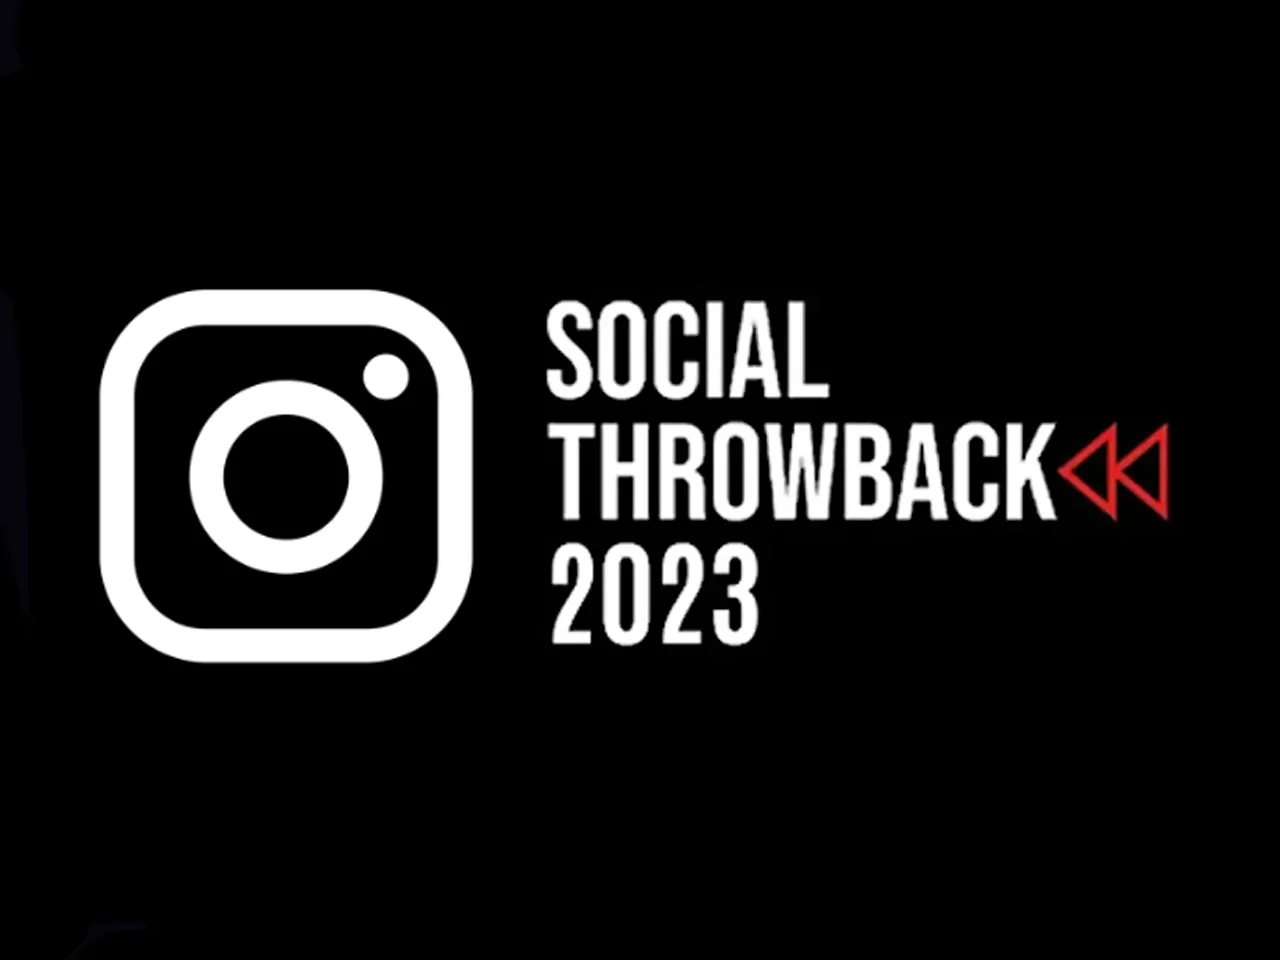 Social Throwback 2023: A year where Instagram enhanced user experience & launched a rival app for X